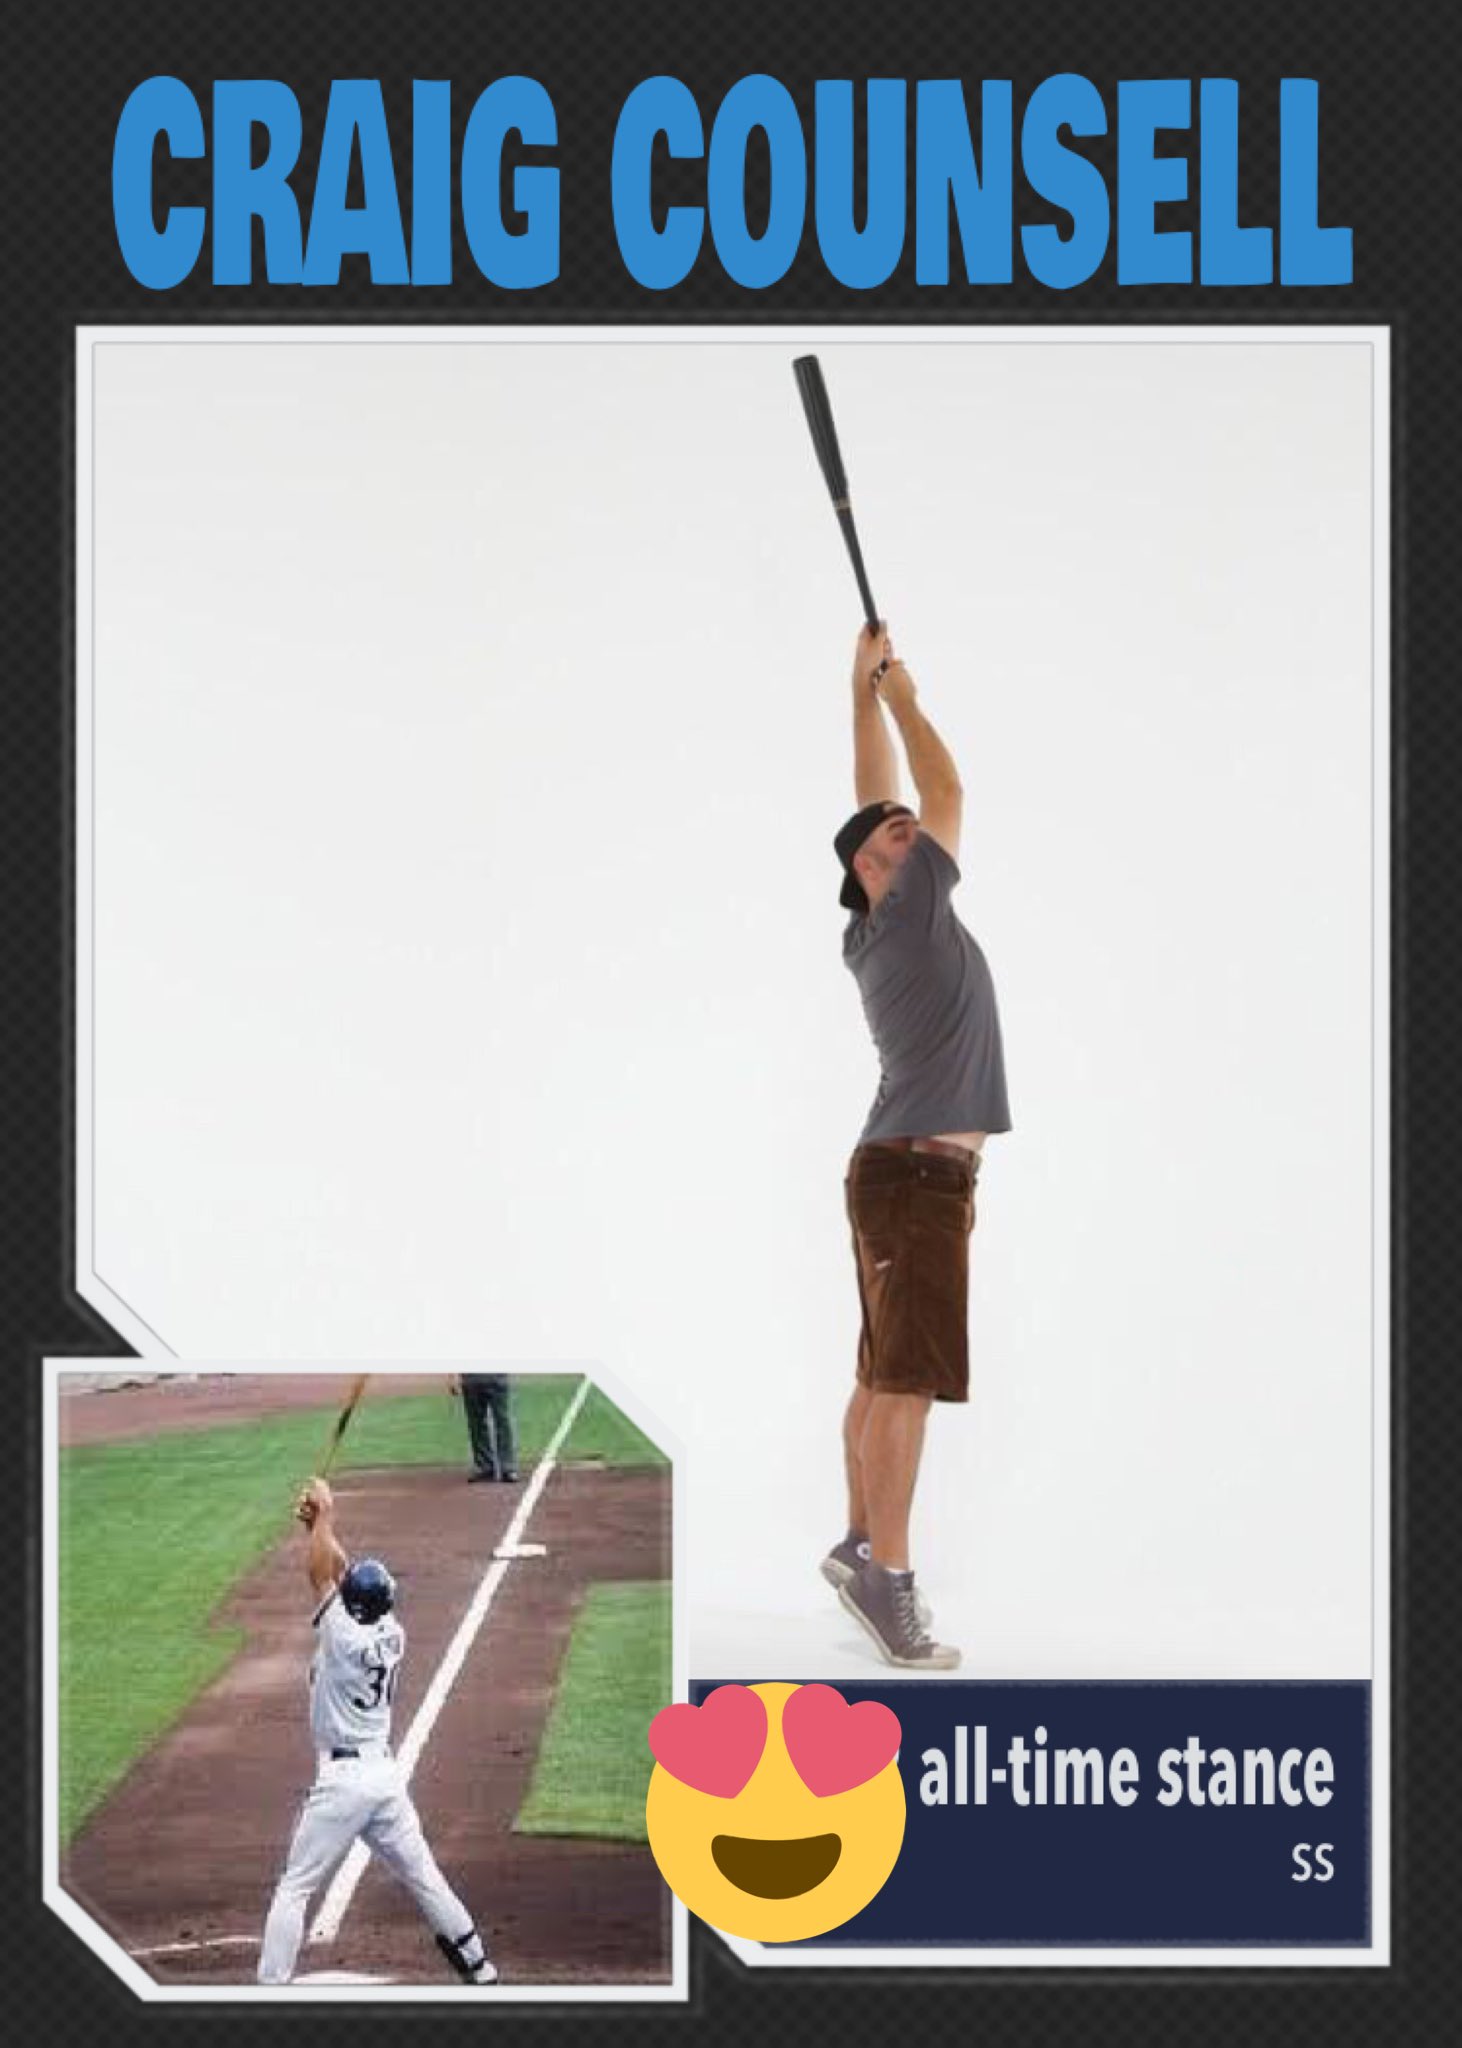 Batting Stance Guy on X: Craig Counsell runner-up for NL Manager of the  Year. But #1 on NL Manager Batting Stance.  / X